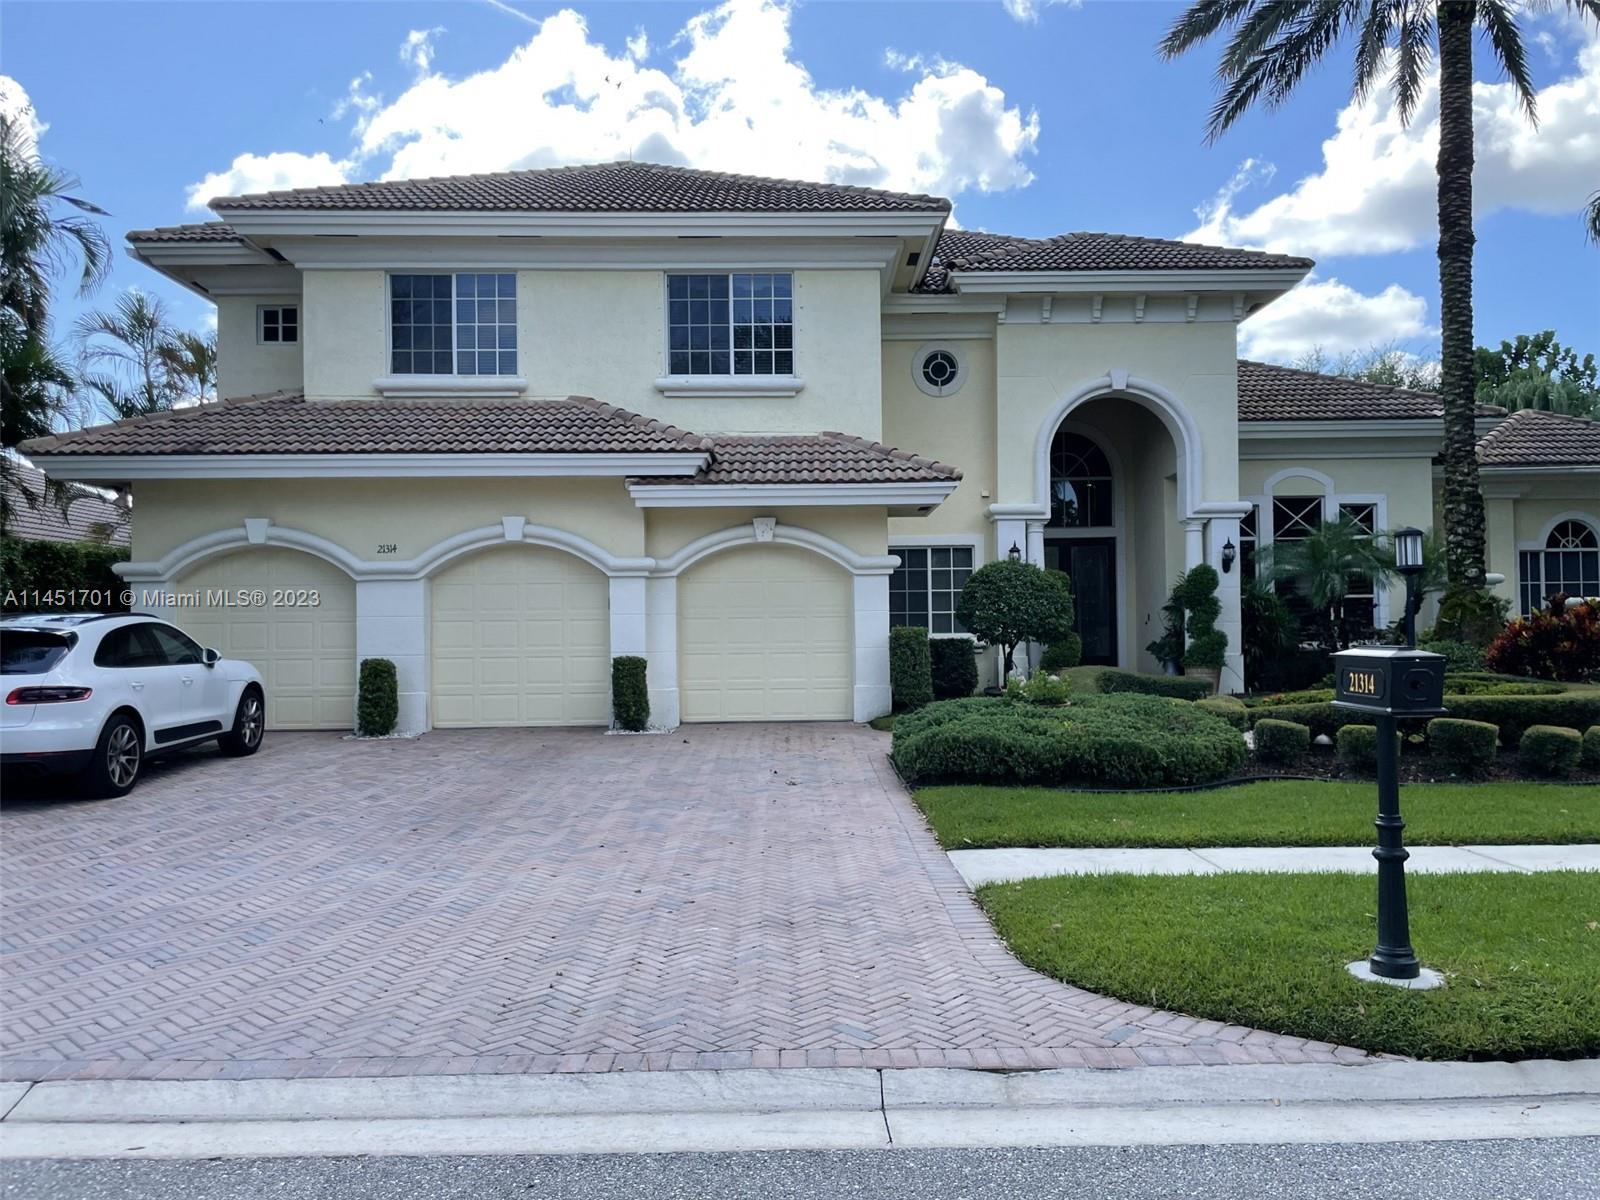 This exquisite home situated on the sixth fairway of Boca Grove is truly one-of-a-kind. It offers fi